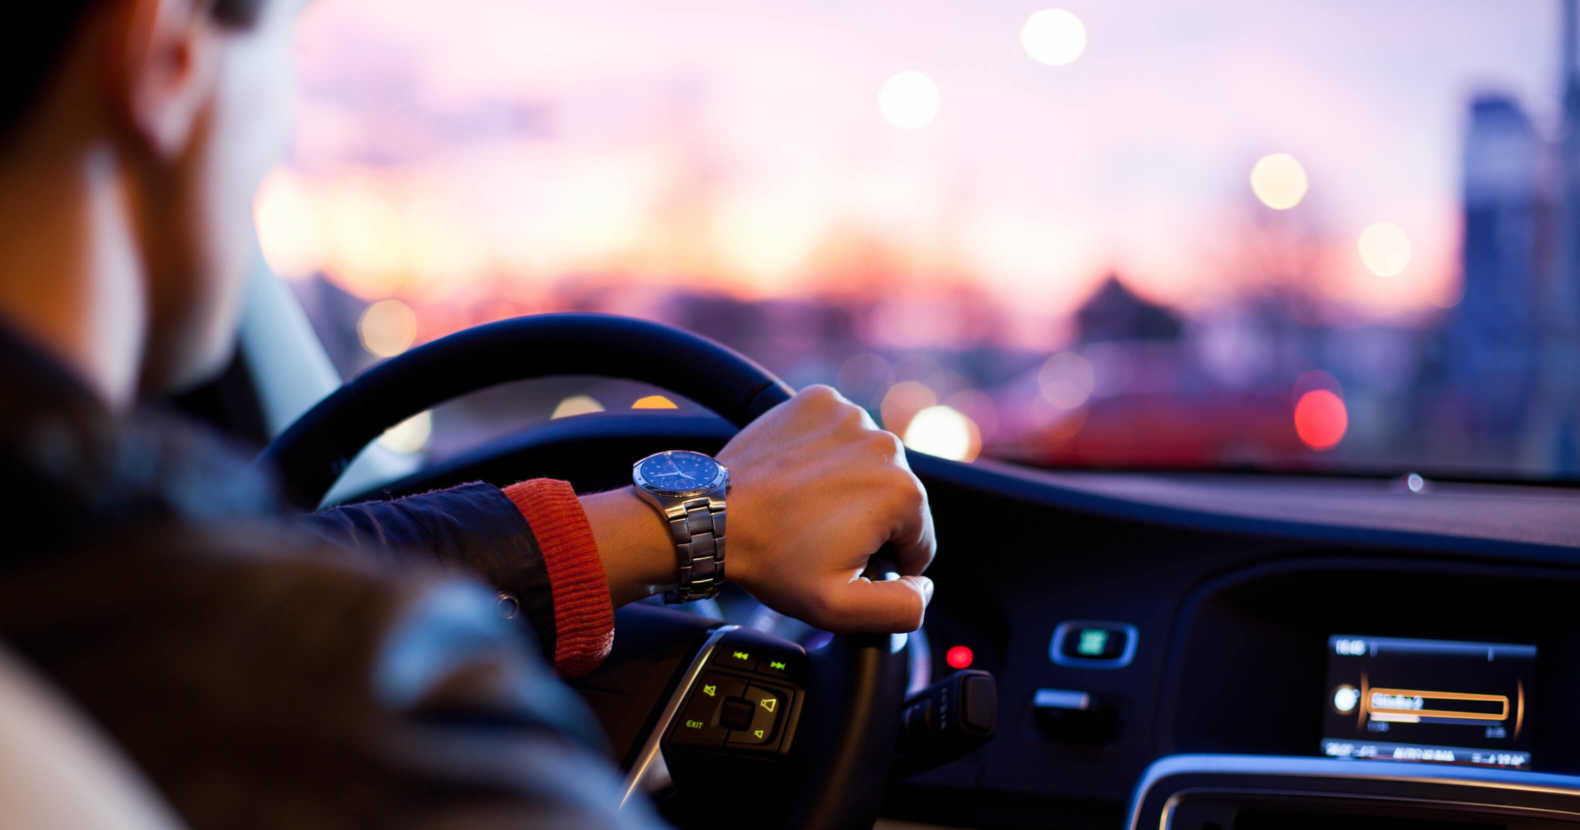 Top 7 Safety Tips for Rideshare & Taxi Drivers